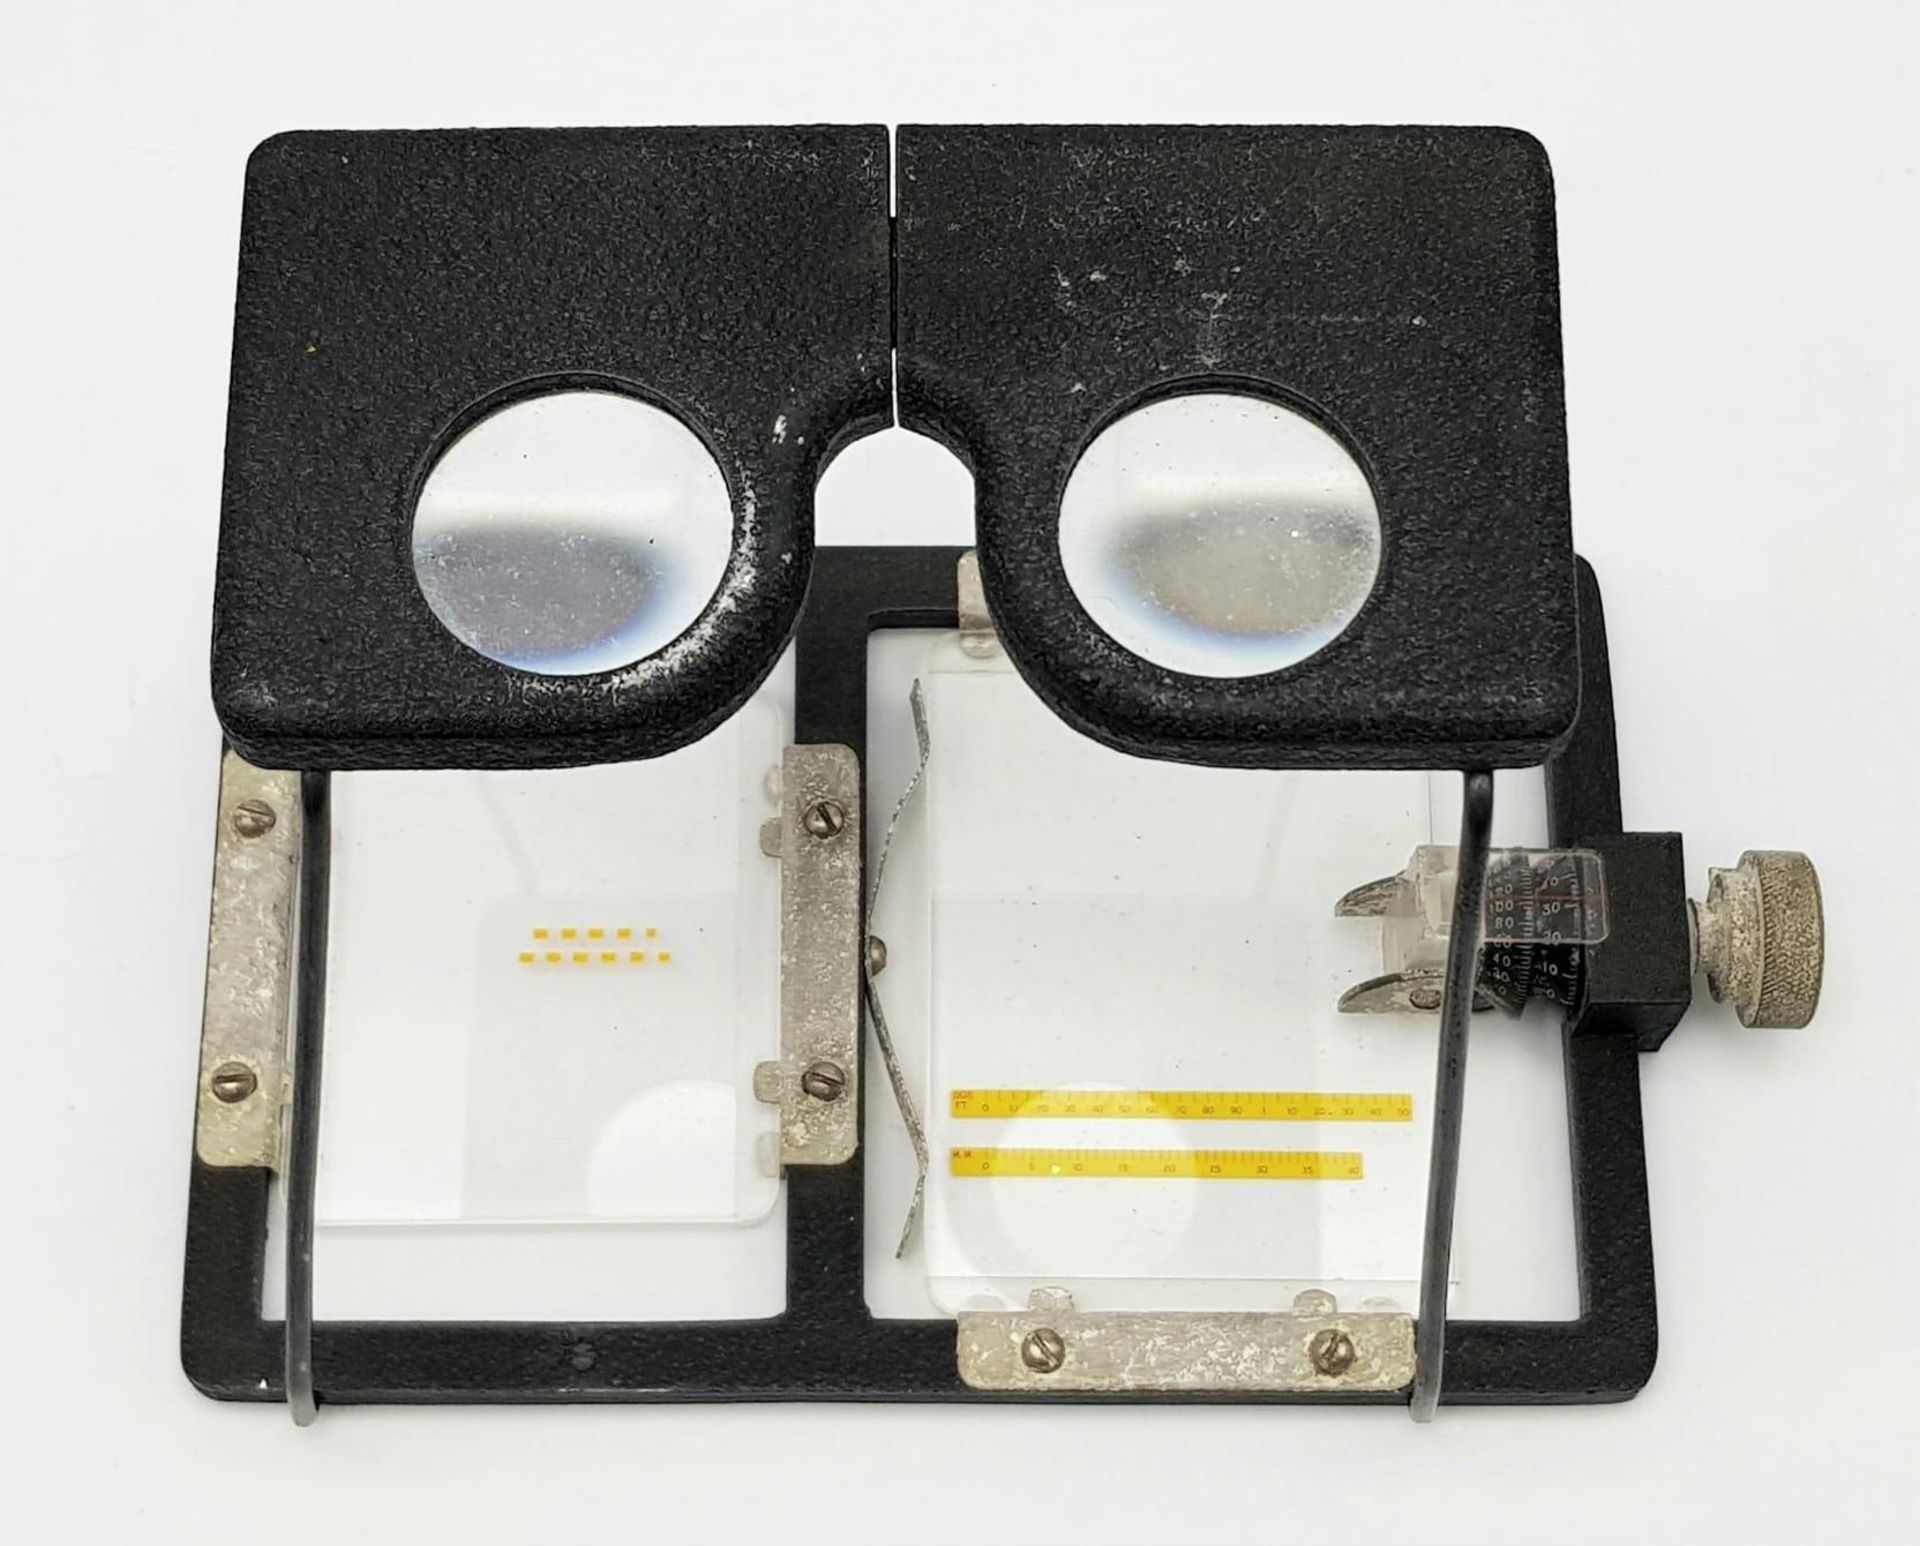 A Vintage Austin Photo Interpretometer - Used for measuring distances in stereoscopic photographs. - Image 2 of 7